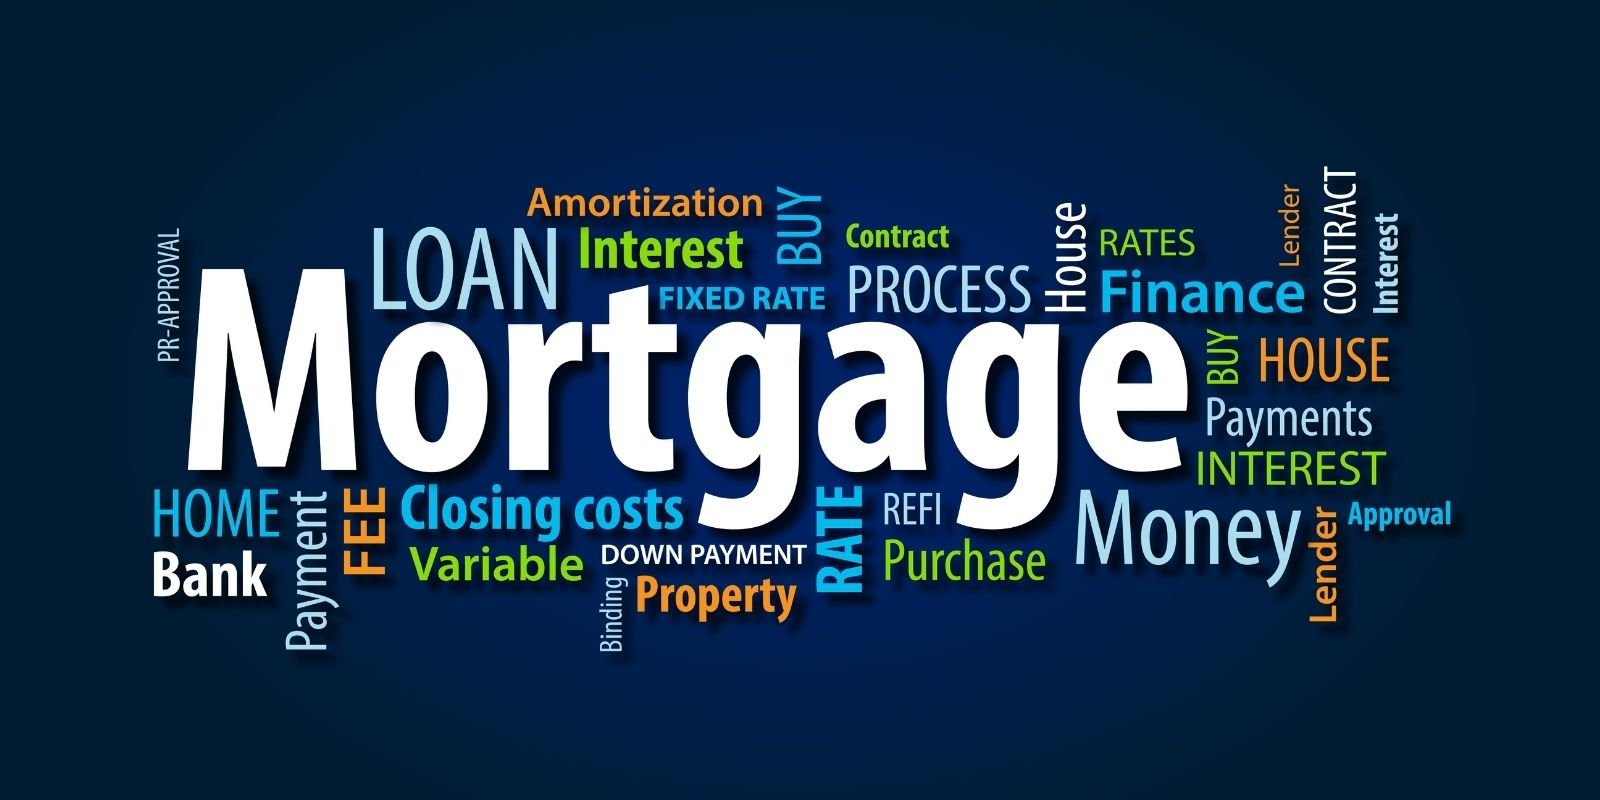 Wrapping Up Our List of Mortgage Shopping Mistakes